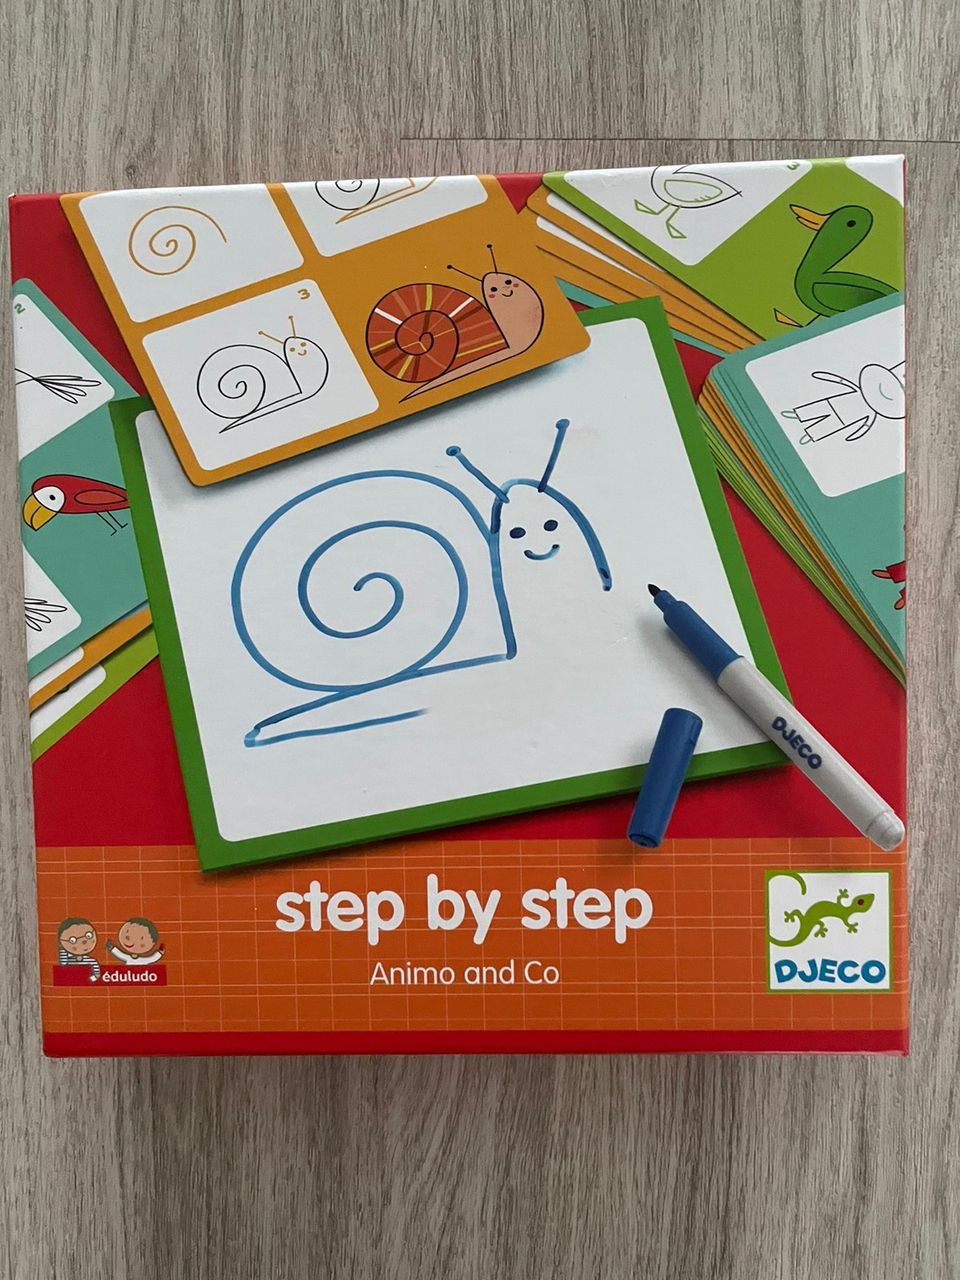 Step by step animo and co